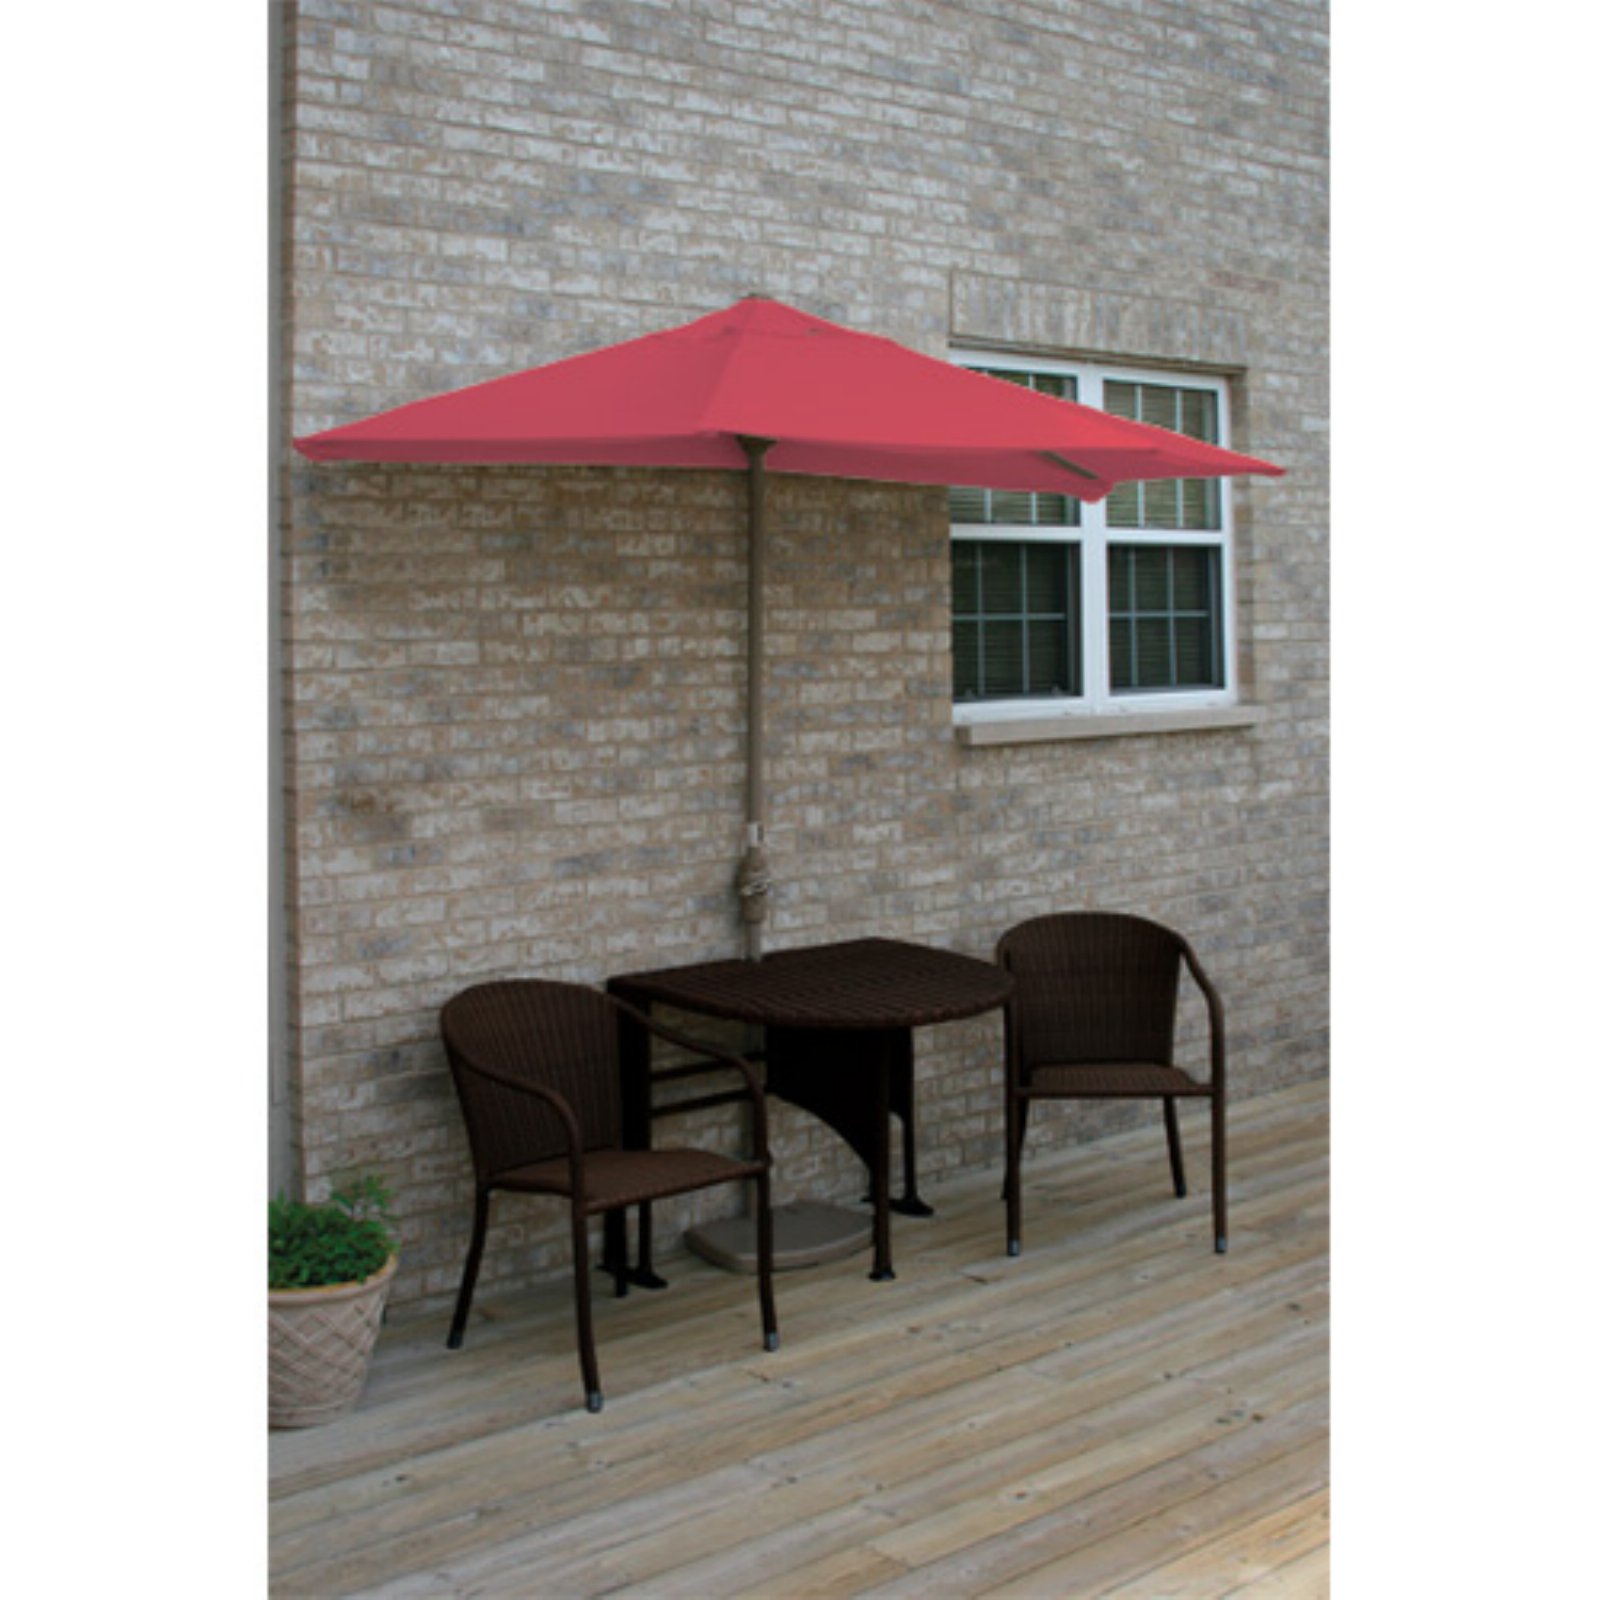 Blue Star Group Terrace Mates Genevieve All-Weather Wicker Java Color Table Set w/ 7.5'-Wide OFF-THE-WALL BRELLA - Jockey Red Sunbrella Canopy - image 1 of 9